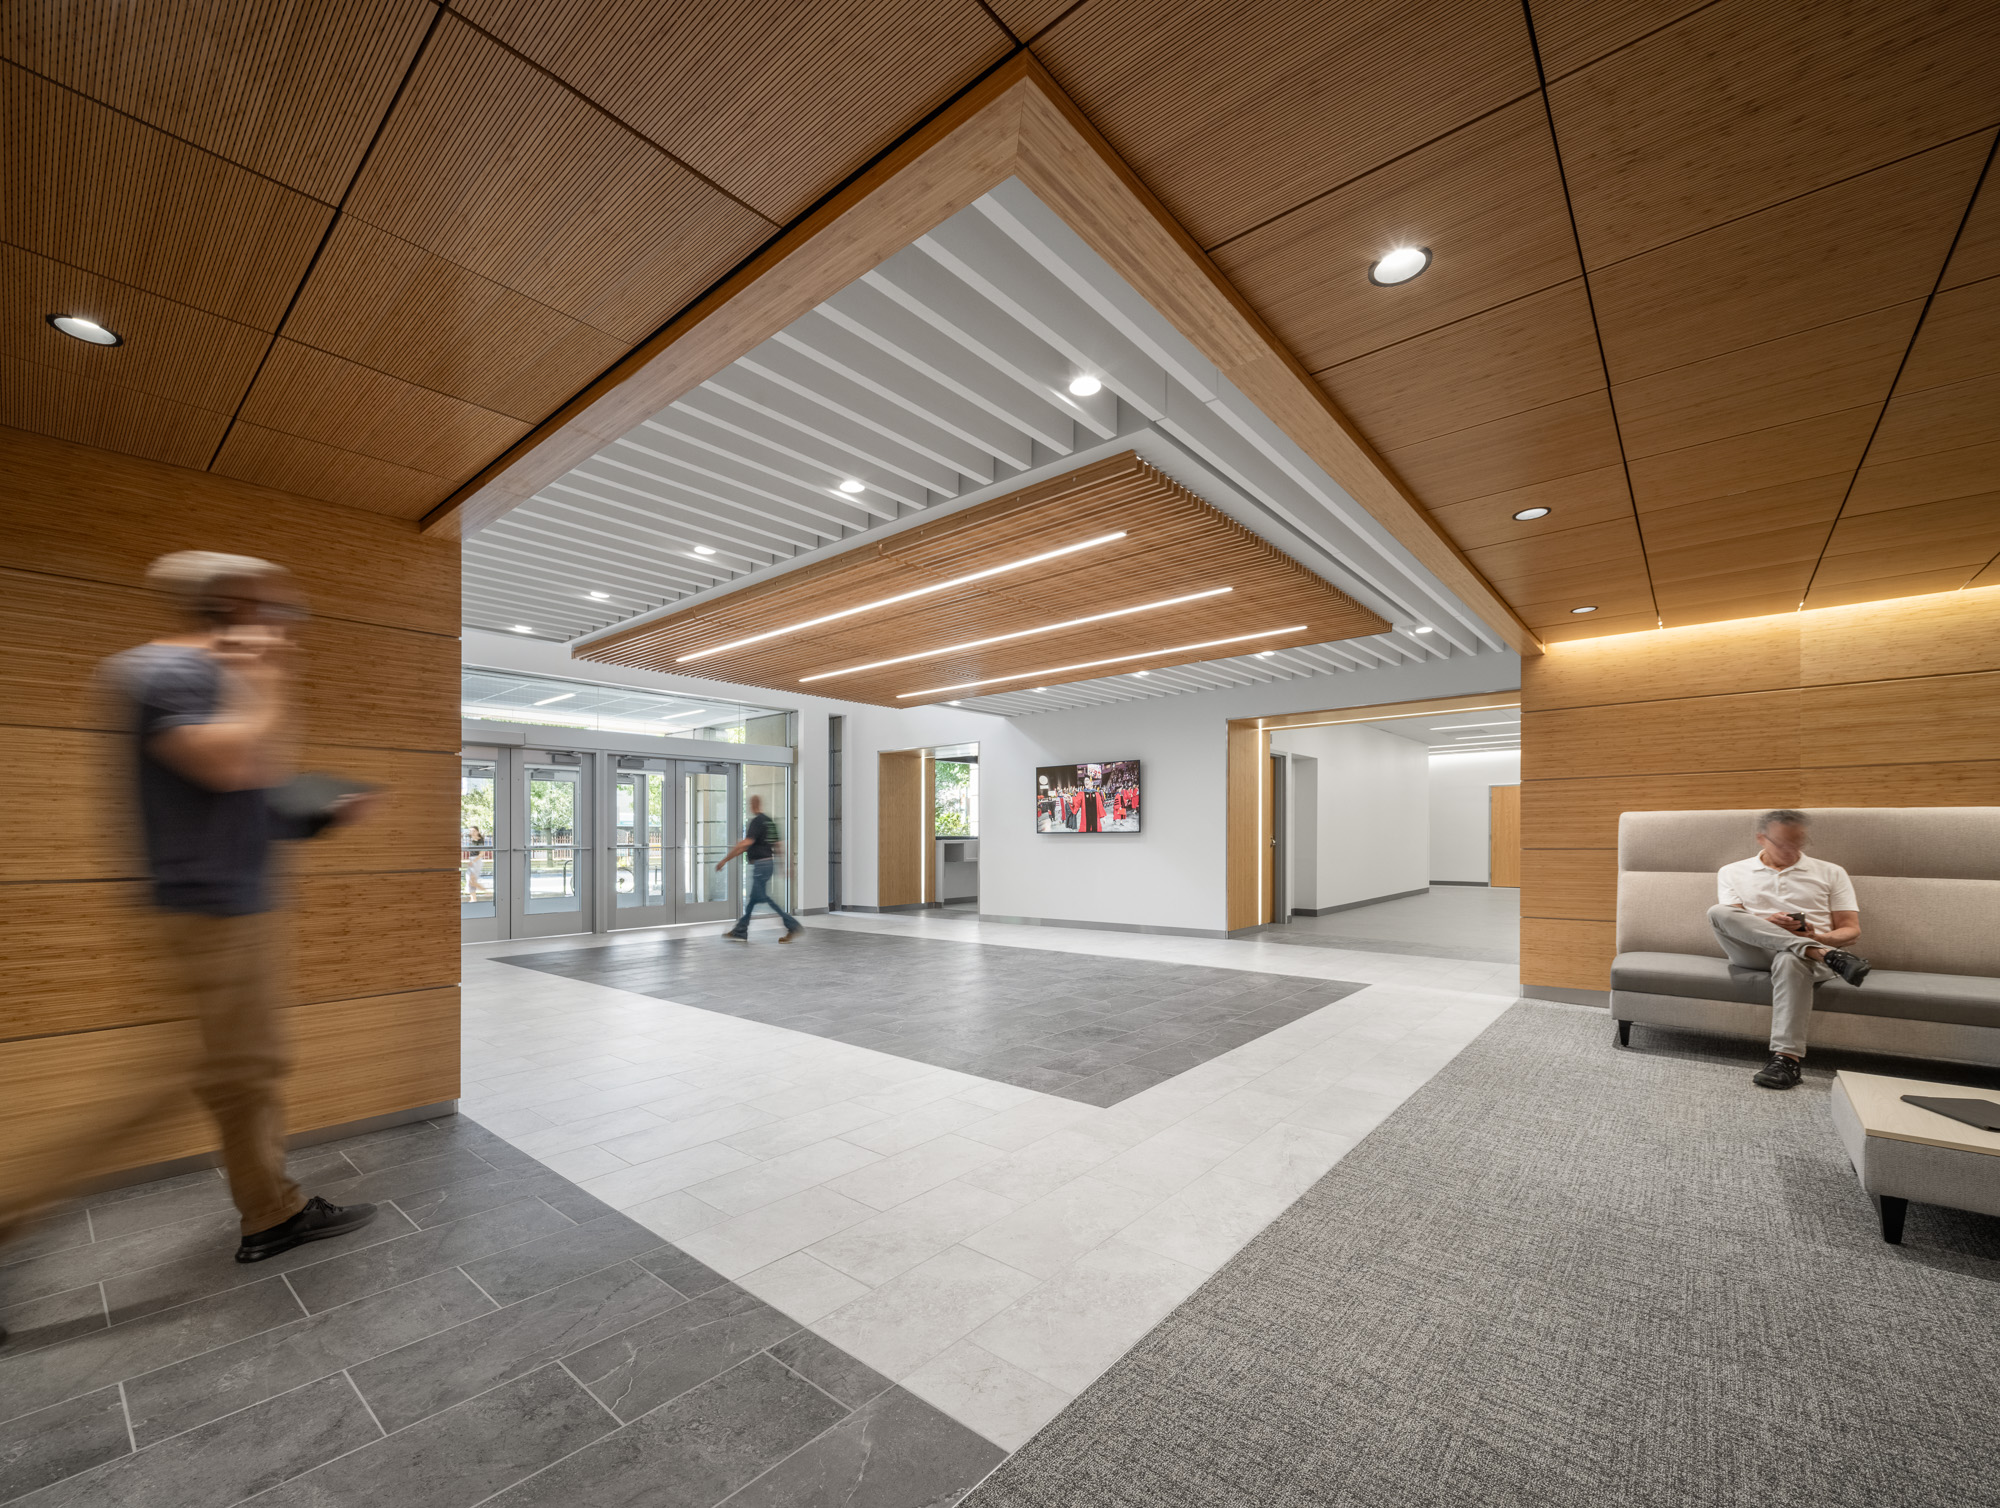 Boston University – Classroom and Lobby Renovations at Sargent College Health & Rehabilitation Services